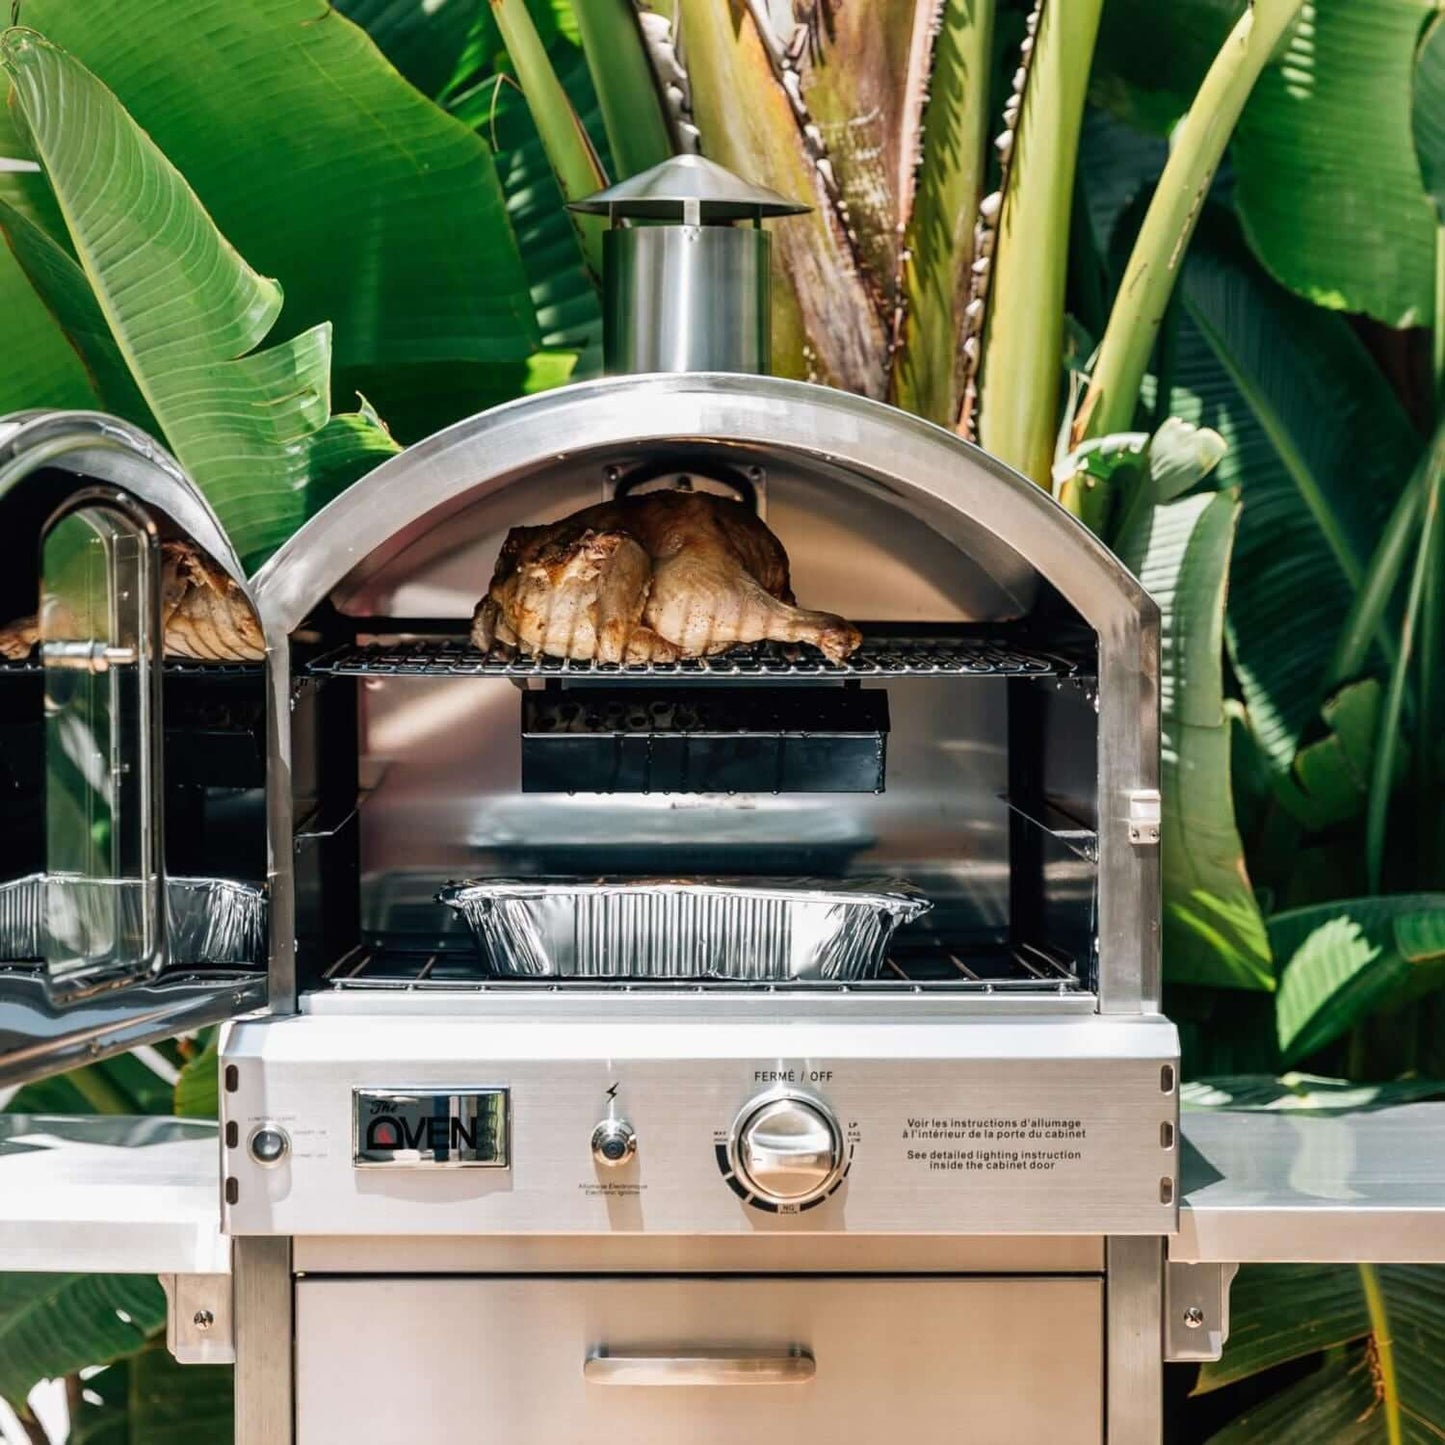 Summerset SS-OVFS Freestanding Outdoor Pizza Oven - In Use With Smoker Box